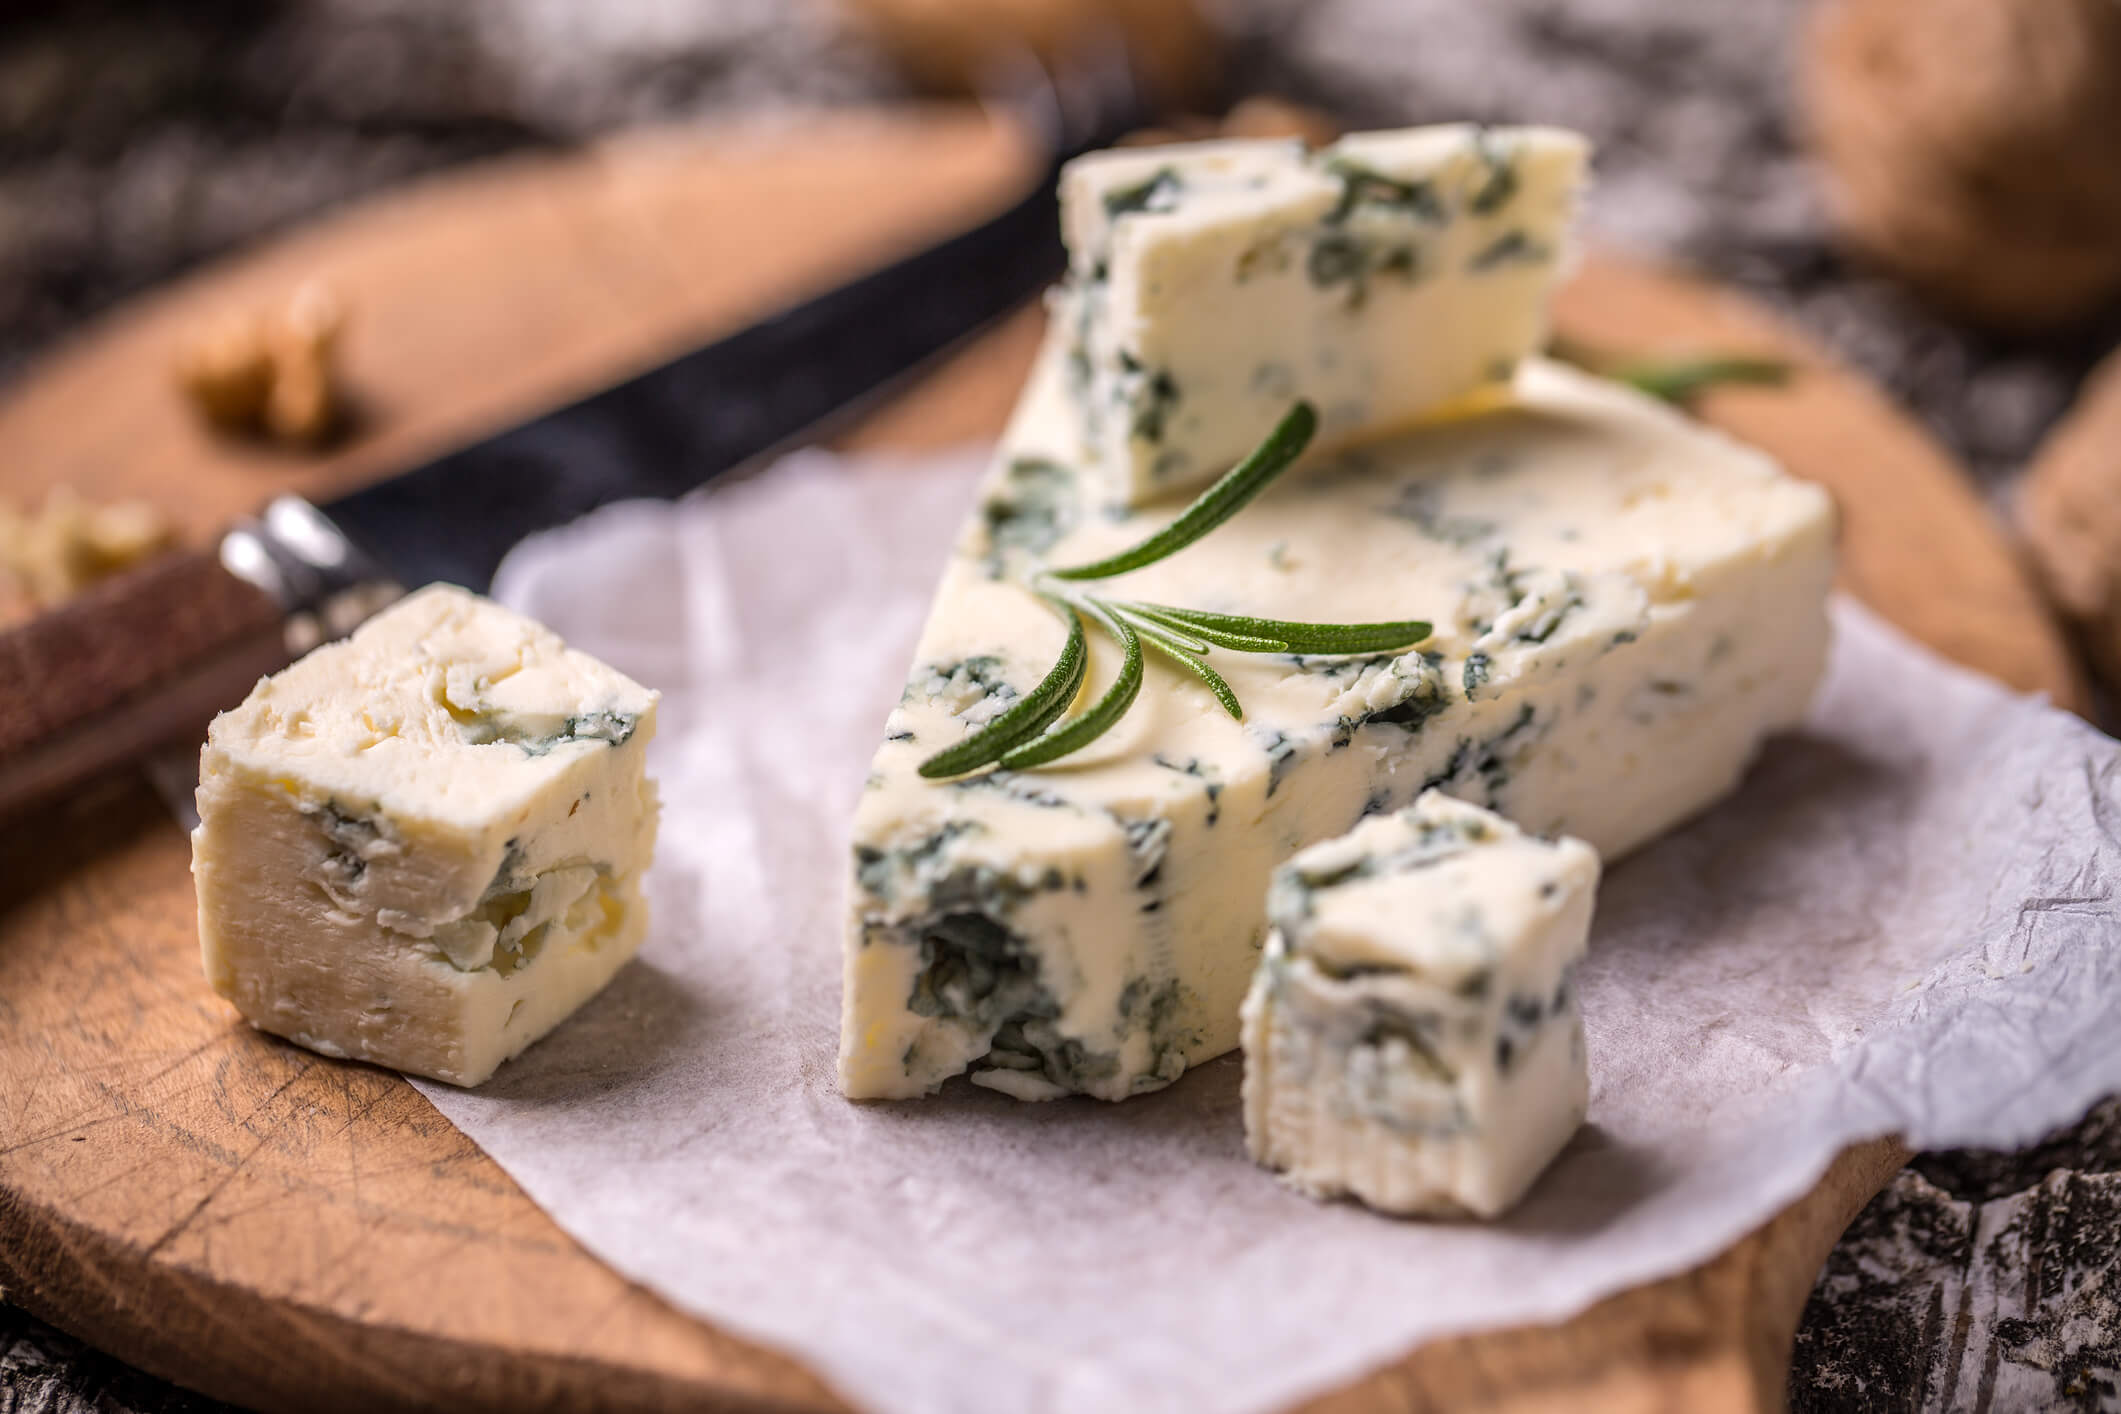 Blue cheese adds texture and color to any cheese board.